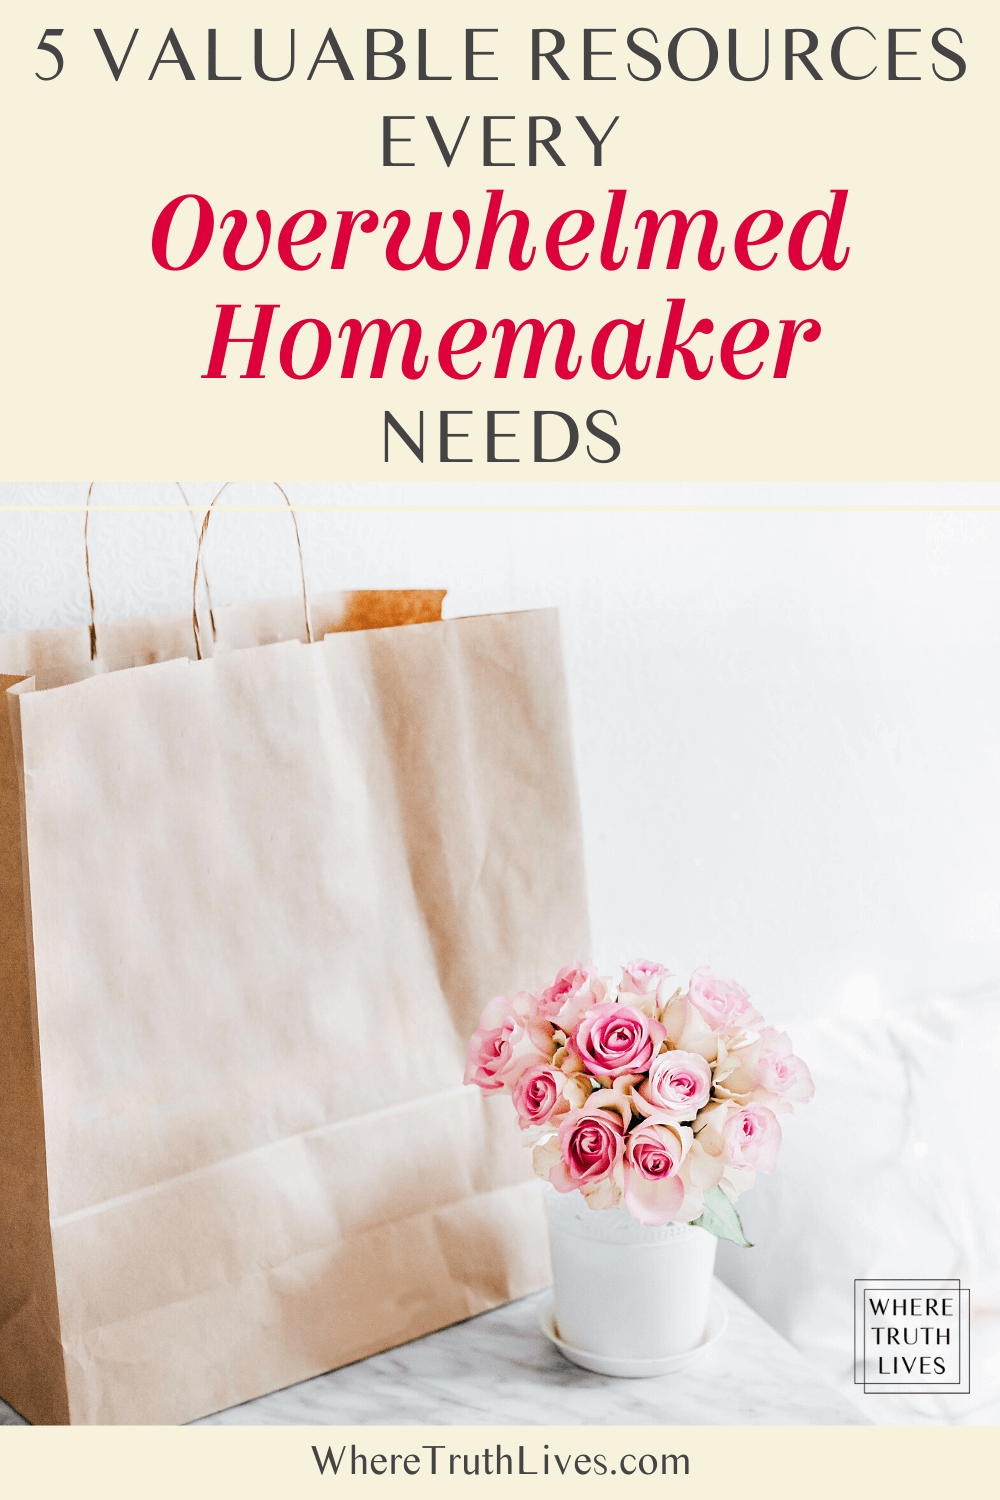 Being a homemaker can be hard, exhausting and even frustrating, but by addressing these key areas, it’s possible to reduce the overwhelm and calm the chaos... | 5 Valuable Resources Every Overwhelmed Homemaker Needs | Where Truth Lives .com | Christian blog post, homemaking, organization, time management, organized